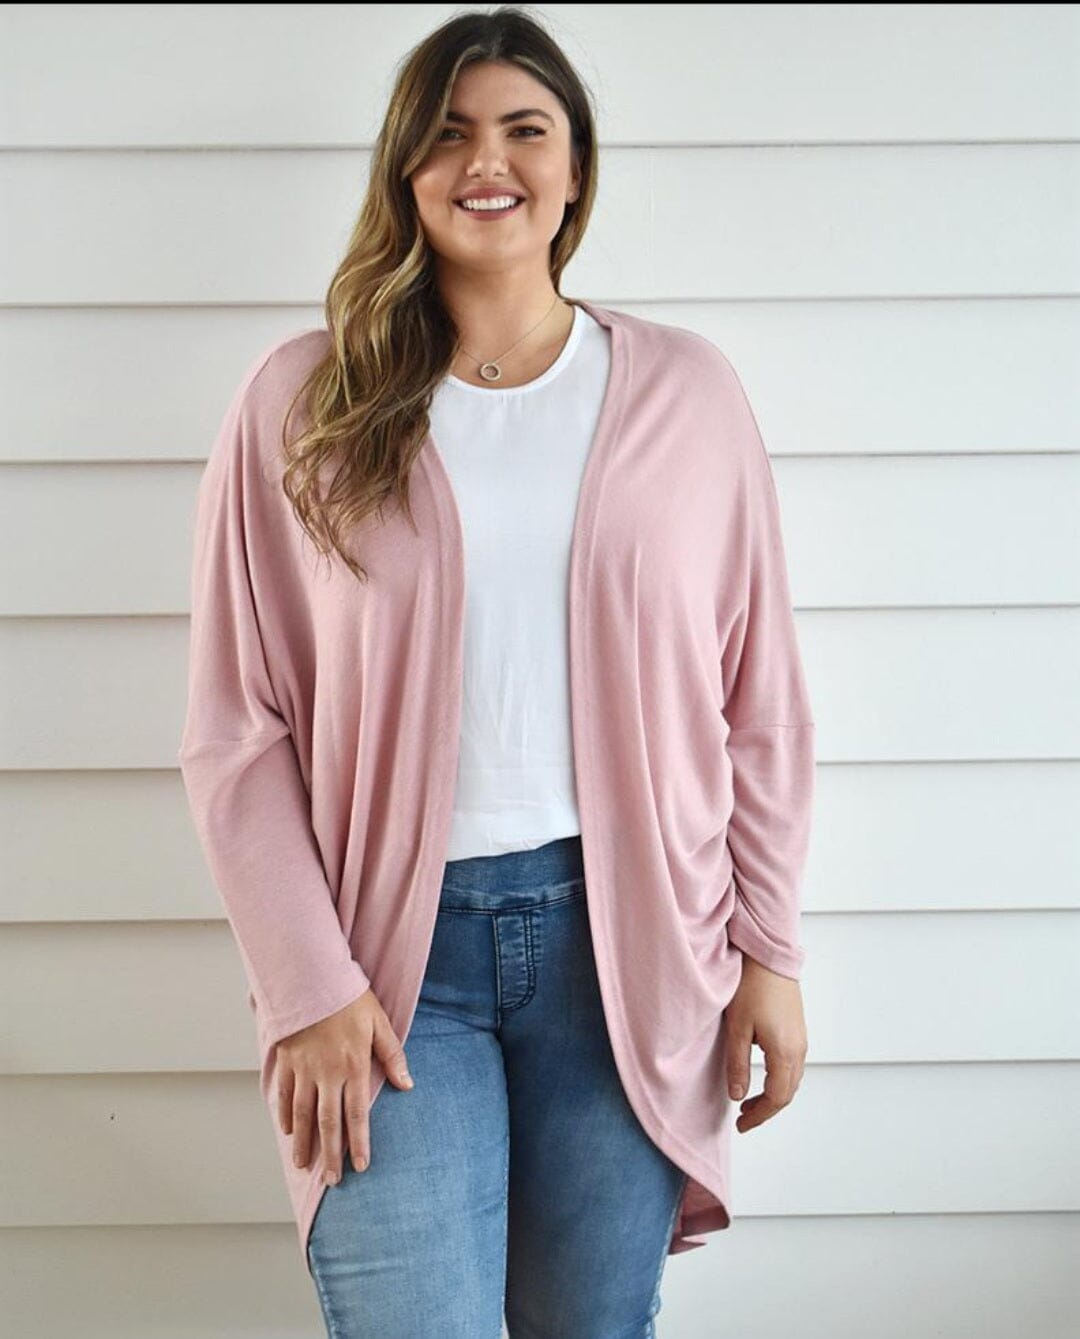 MELLY Circle Cardigans 2 colors - Blush & Copper Brown Cardigan Aambers Goodies xx 